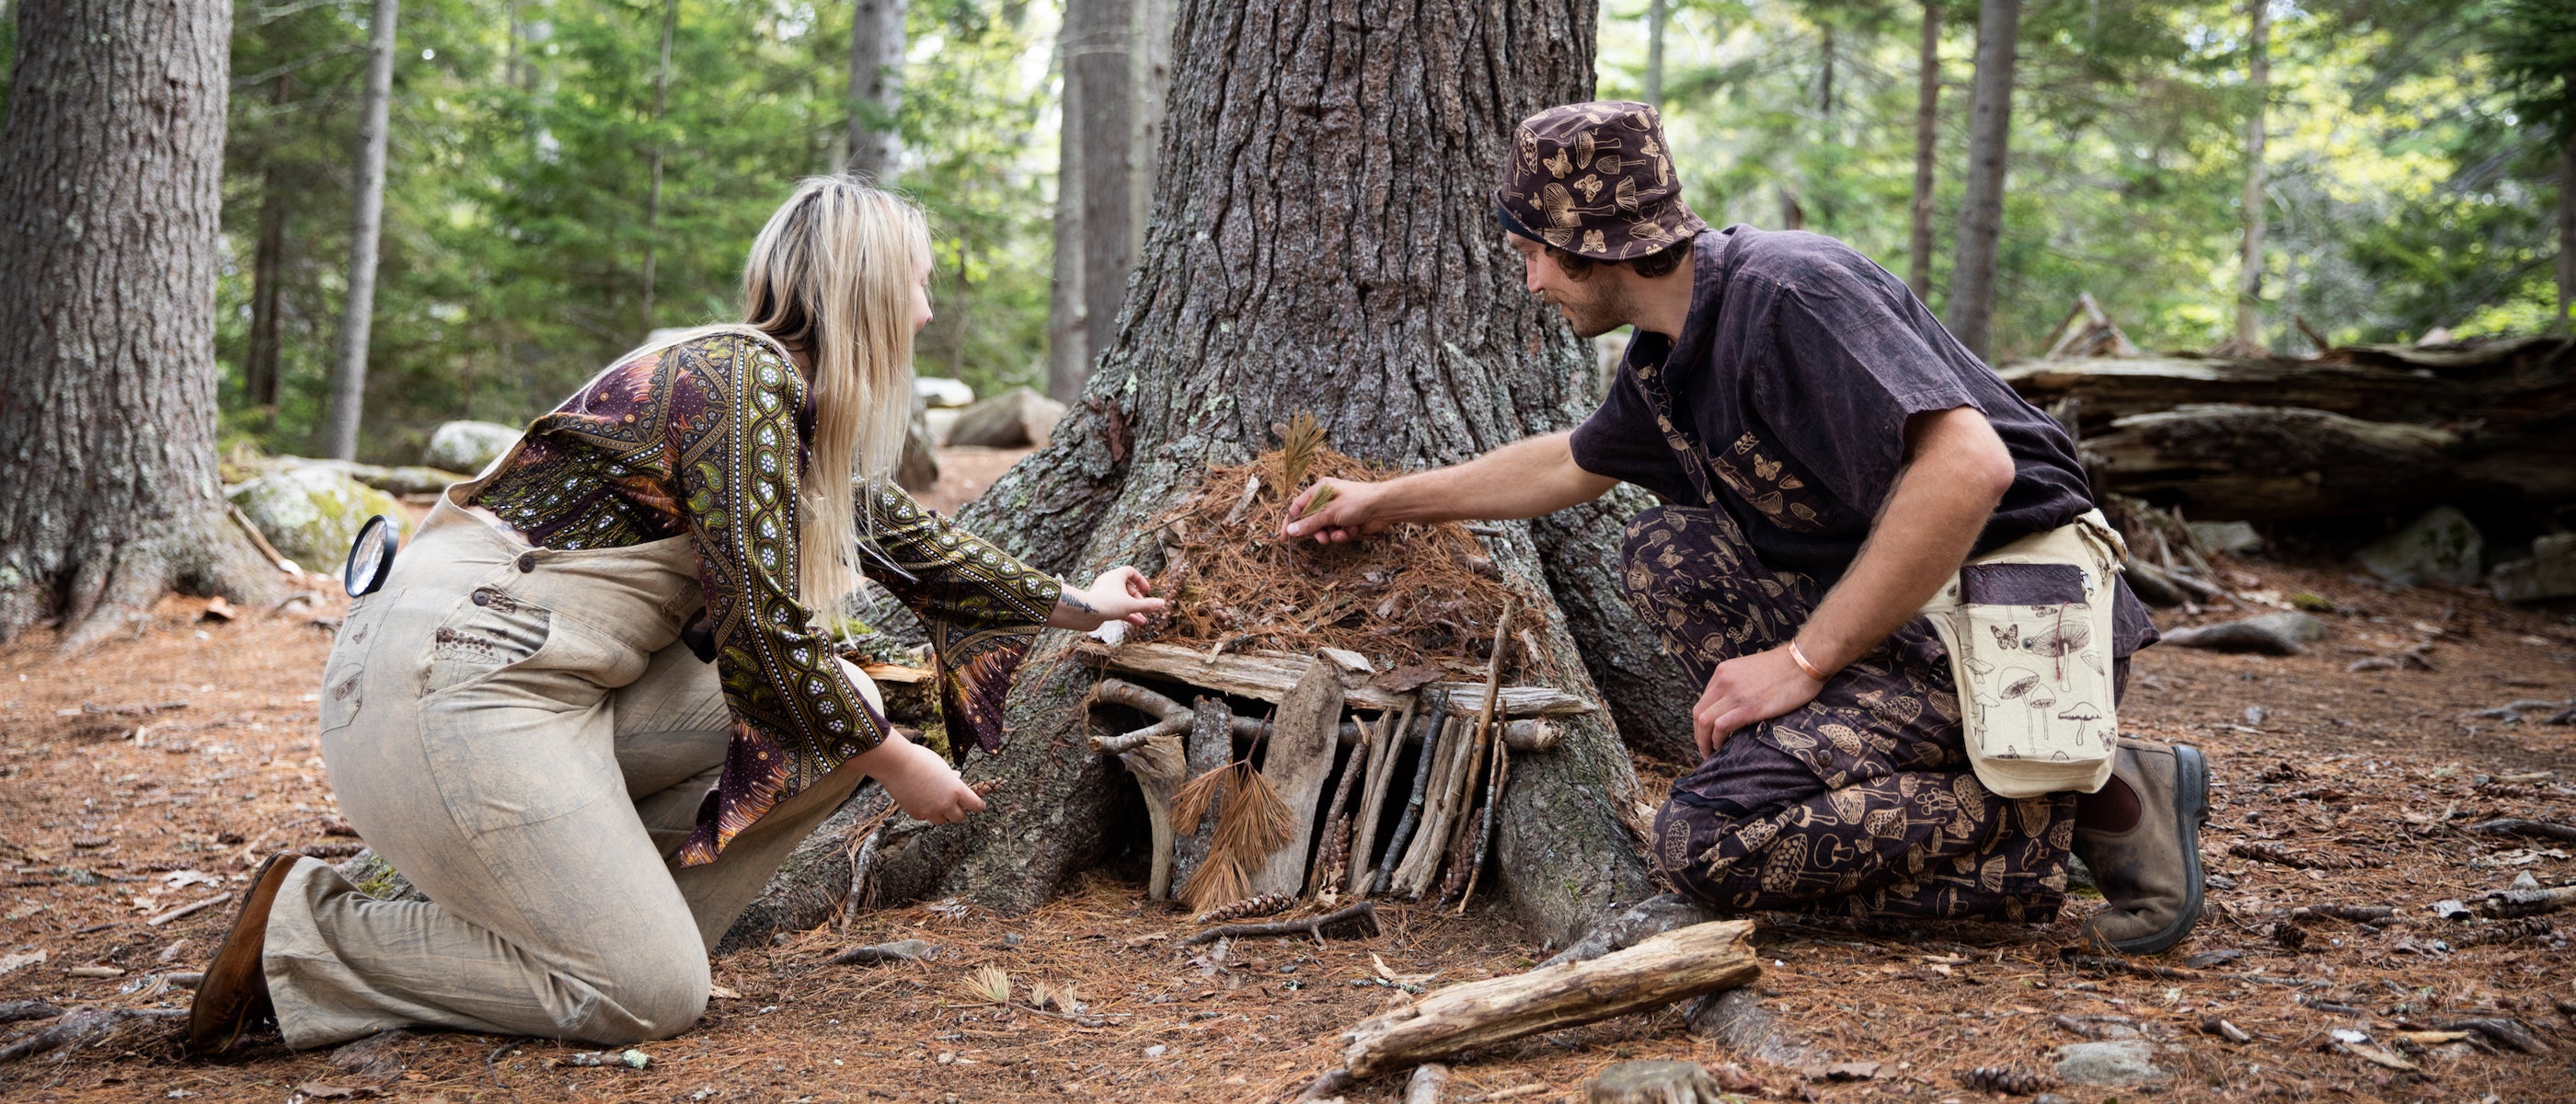 Two mushroom foragers building a fairy house in matching mushroom overalls and mushroom jumpsuit outfits building a fairy house in the forest